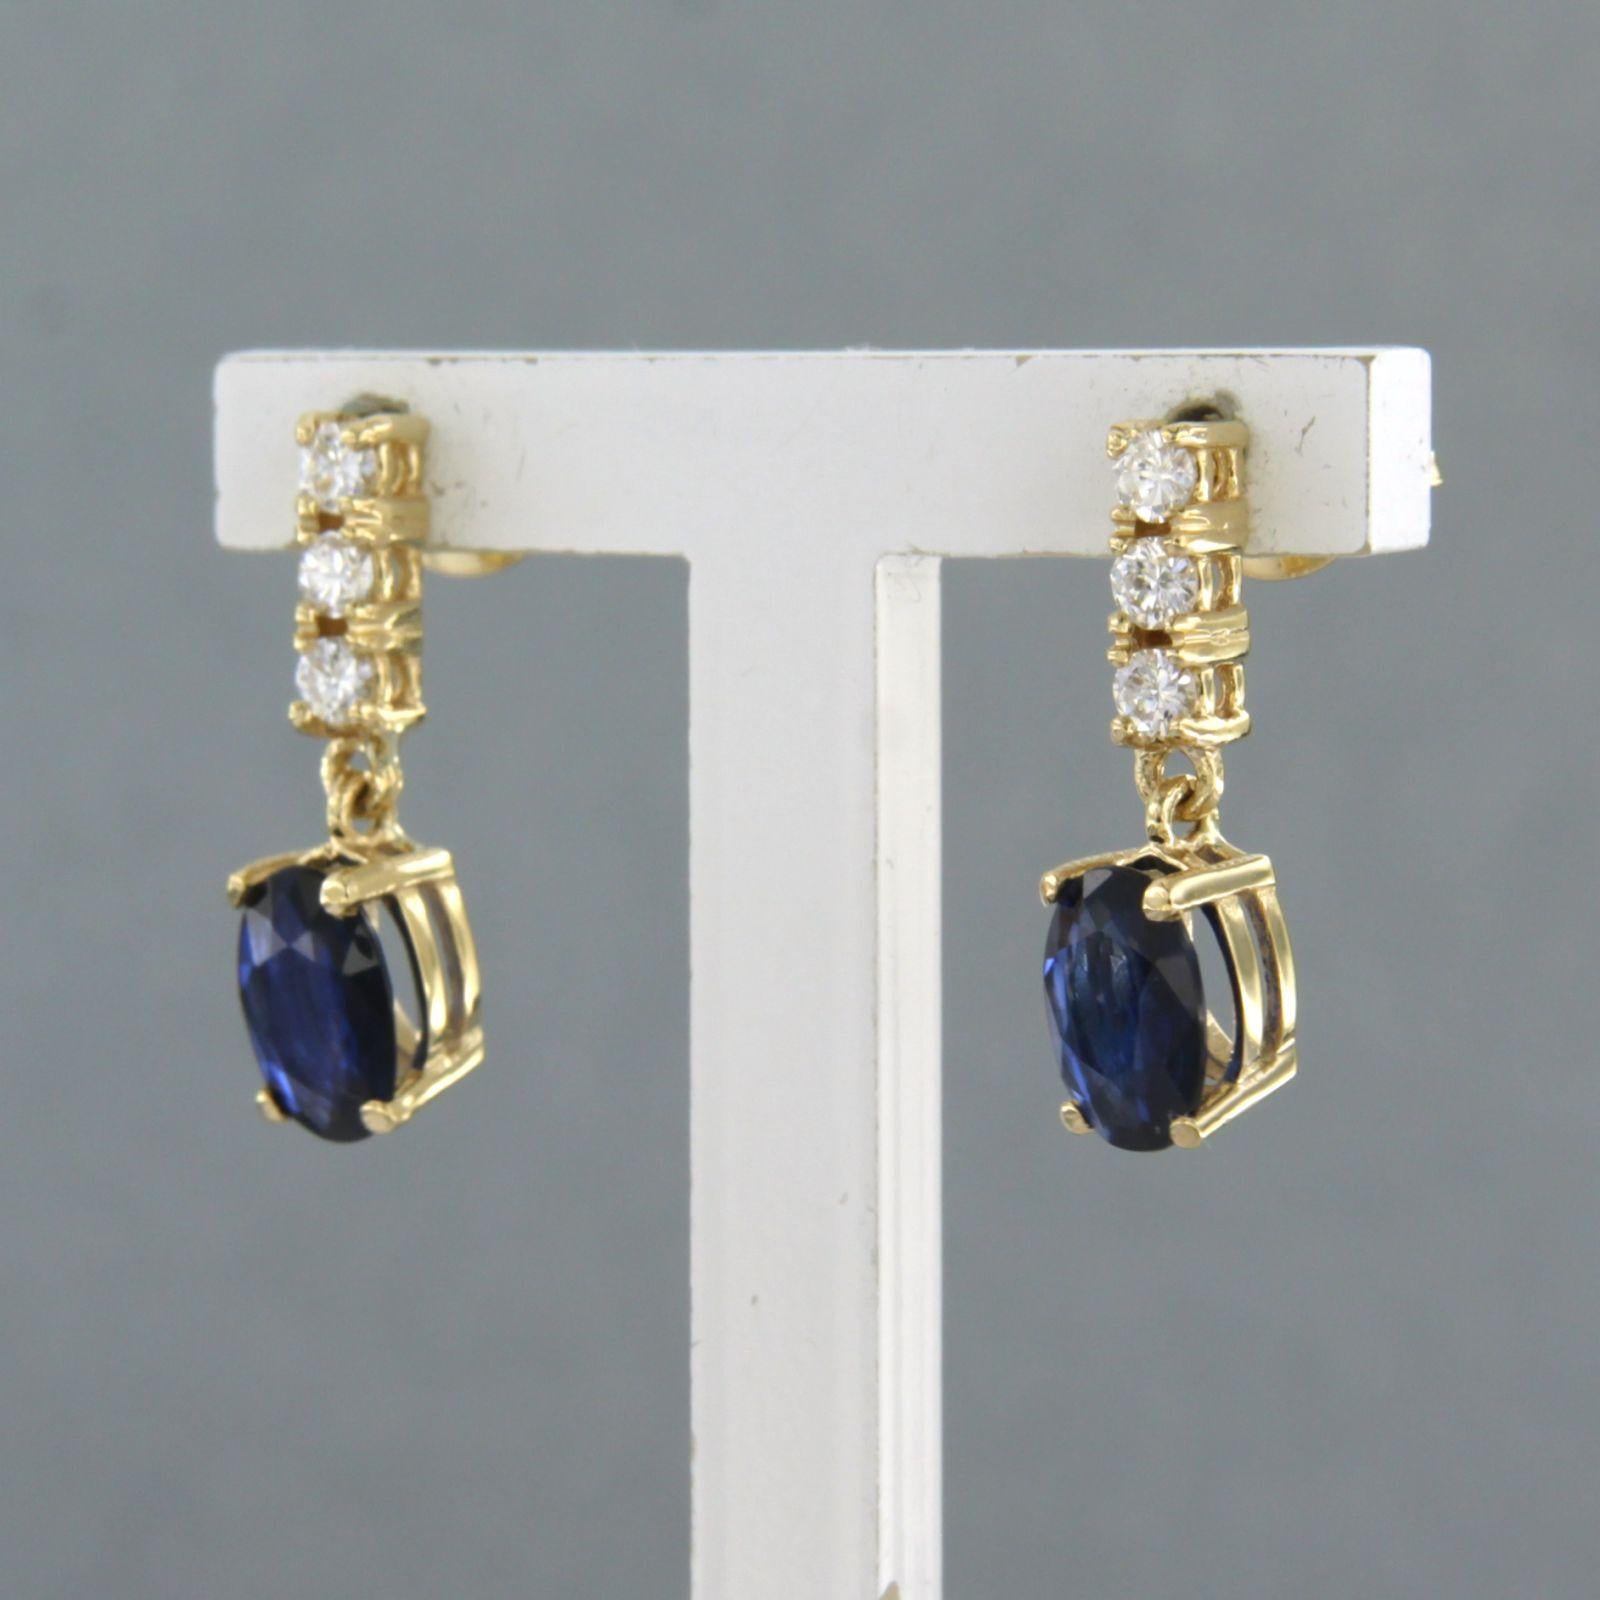 Brilliant Cut Earring set with sapphire up to 1.50ct and diamonds up to 0.24ct 18k yellow gold For Sale